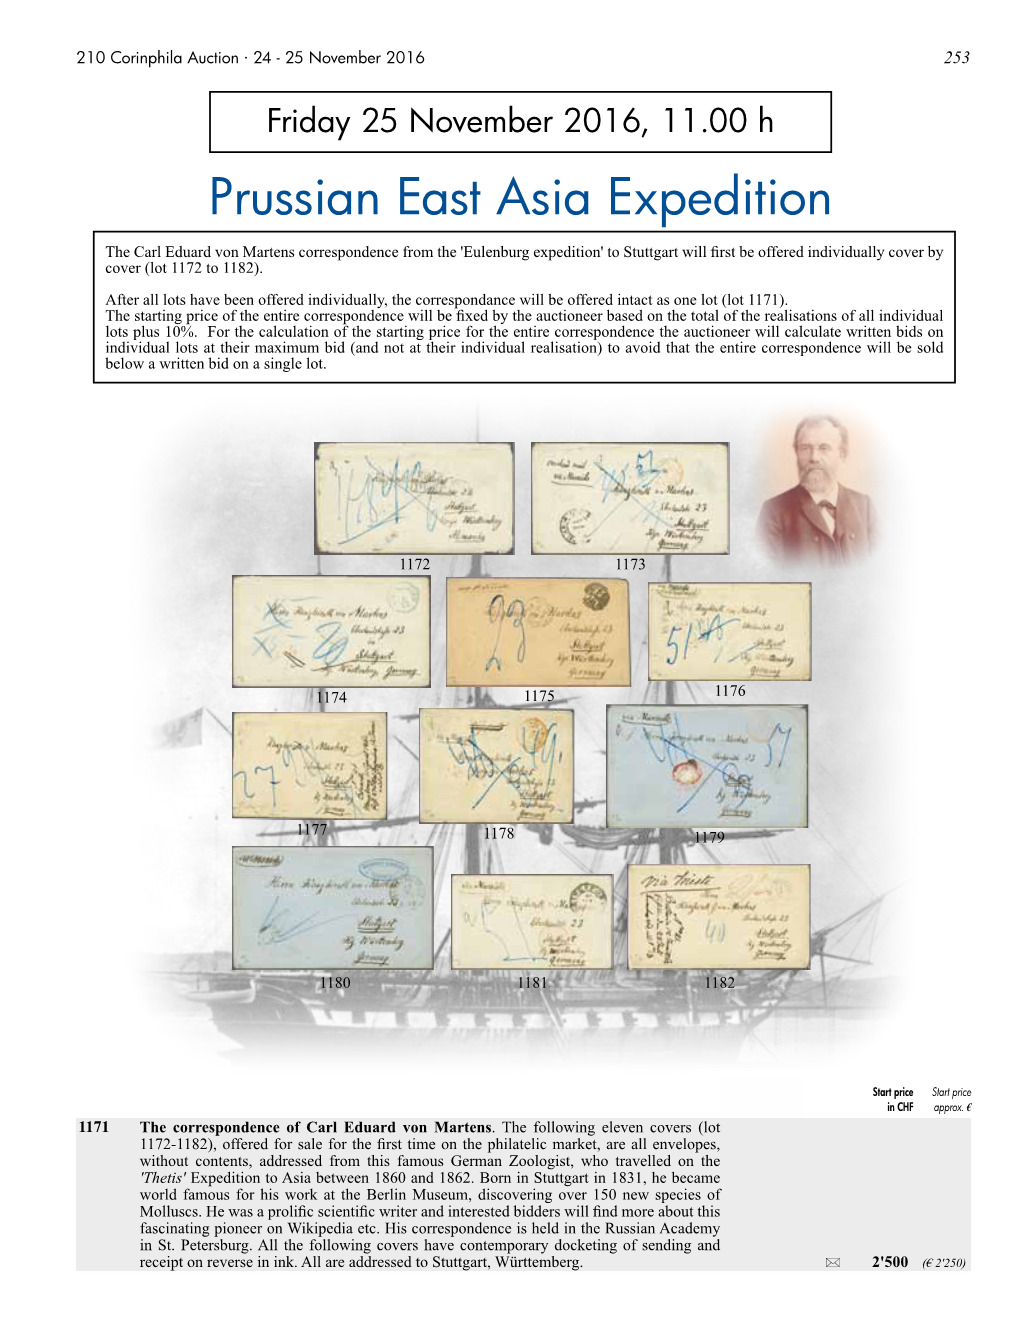 Prussian East Asia Expedition